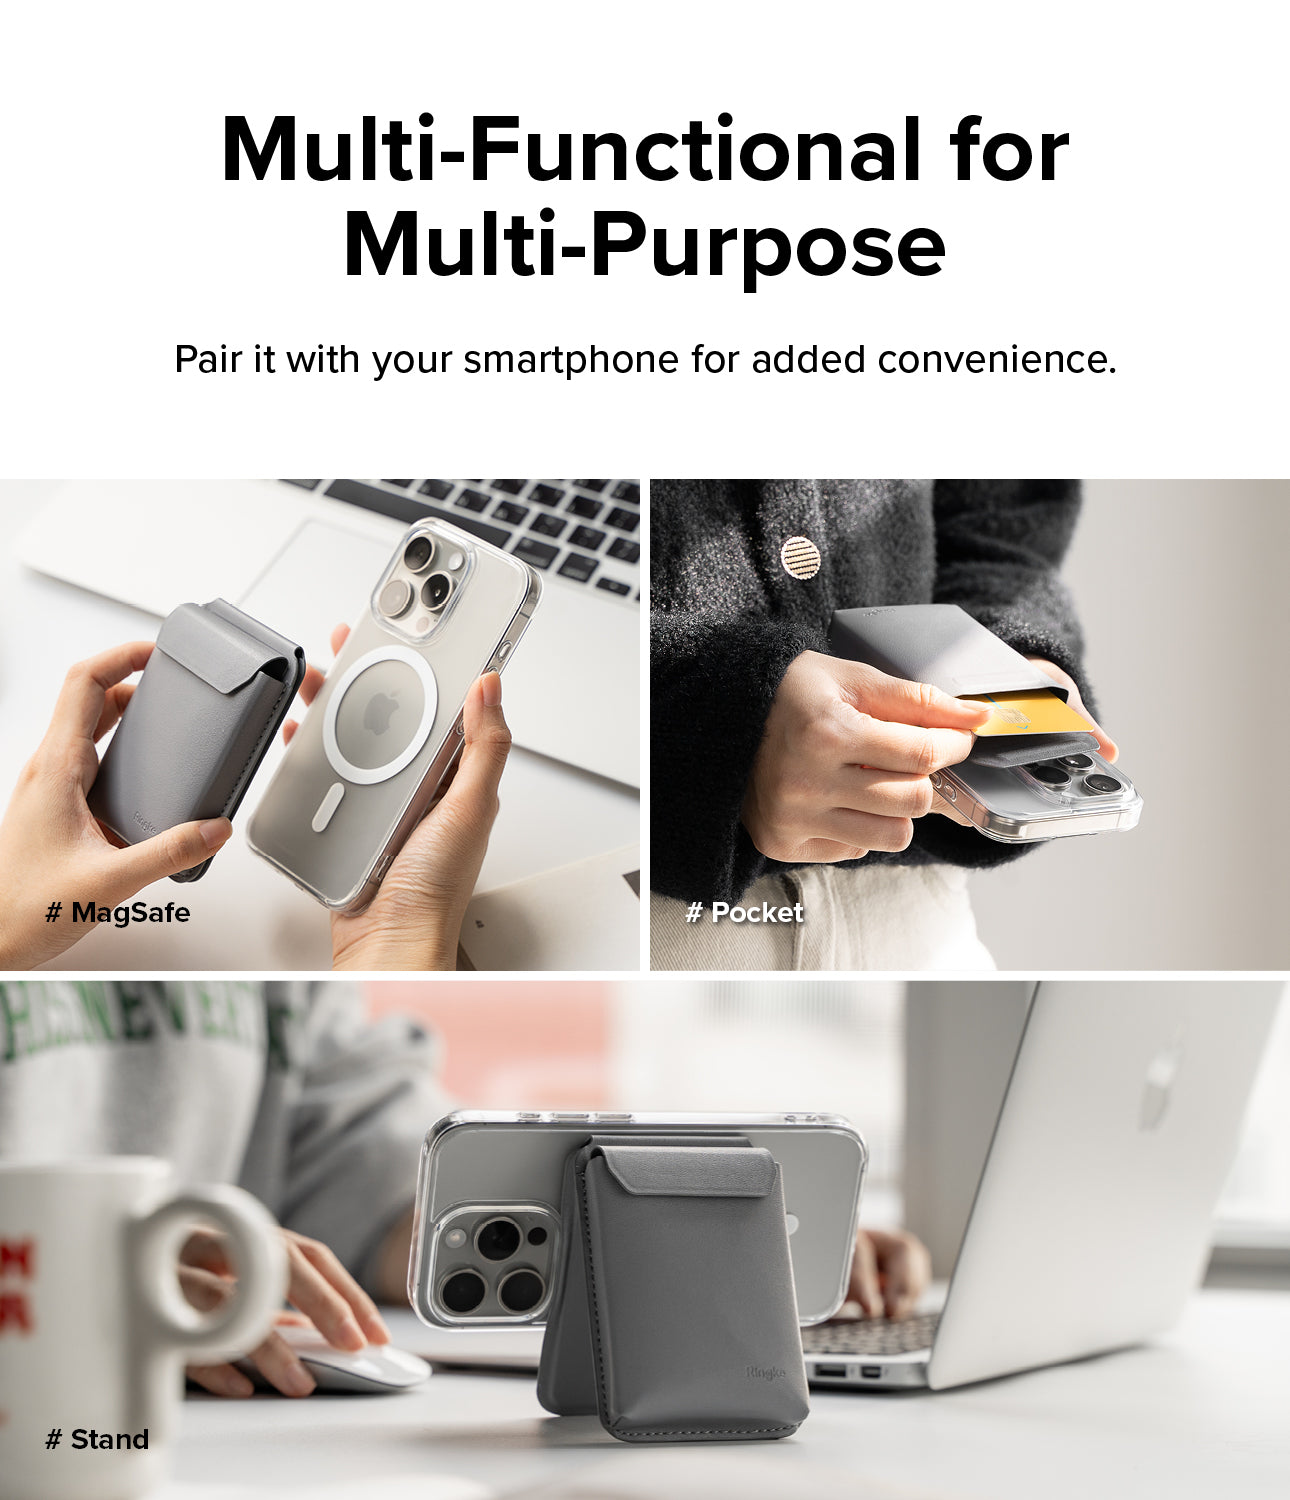 Ringke Stand Pocket Magnetic - Multi-Functional for Multi-Purpose. Pair it with your smartphone for added convenience.